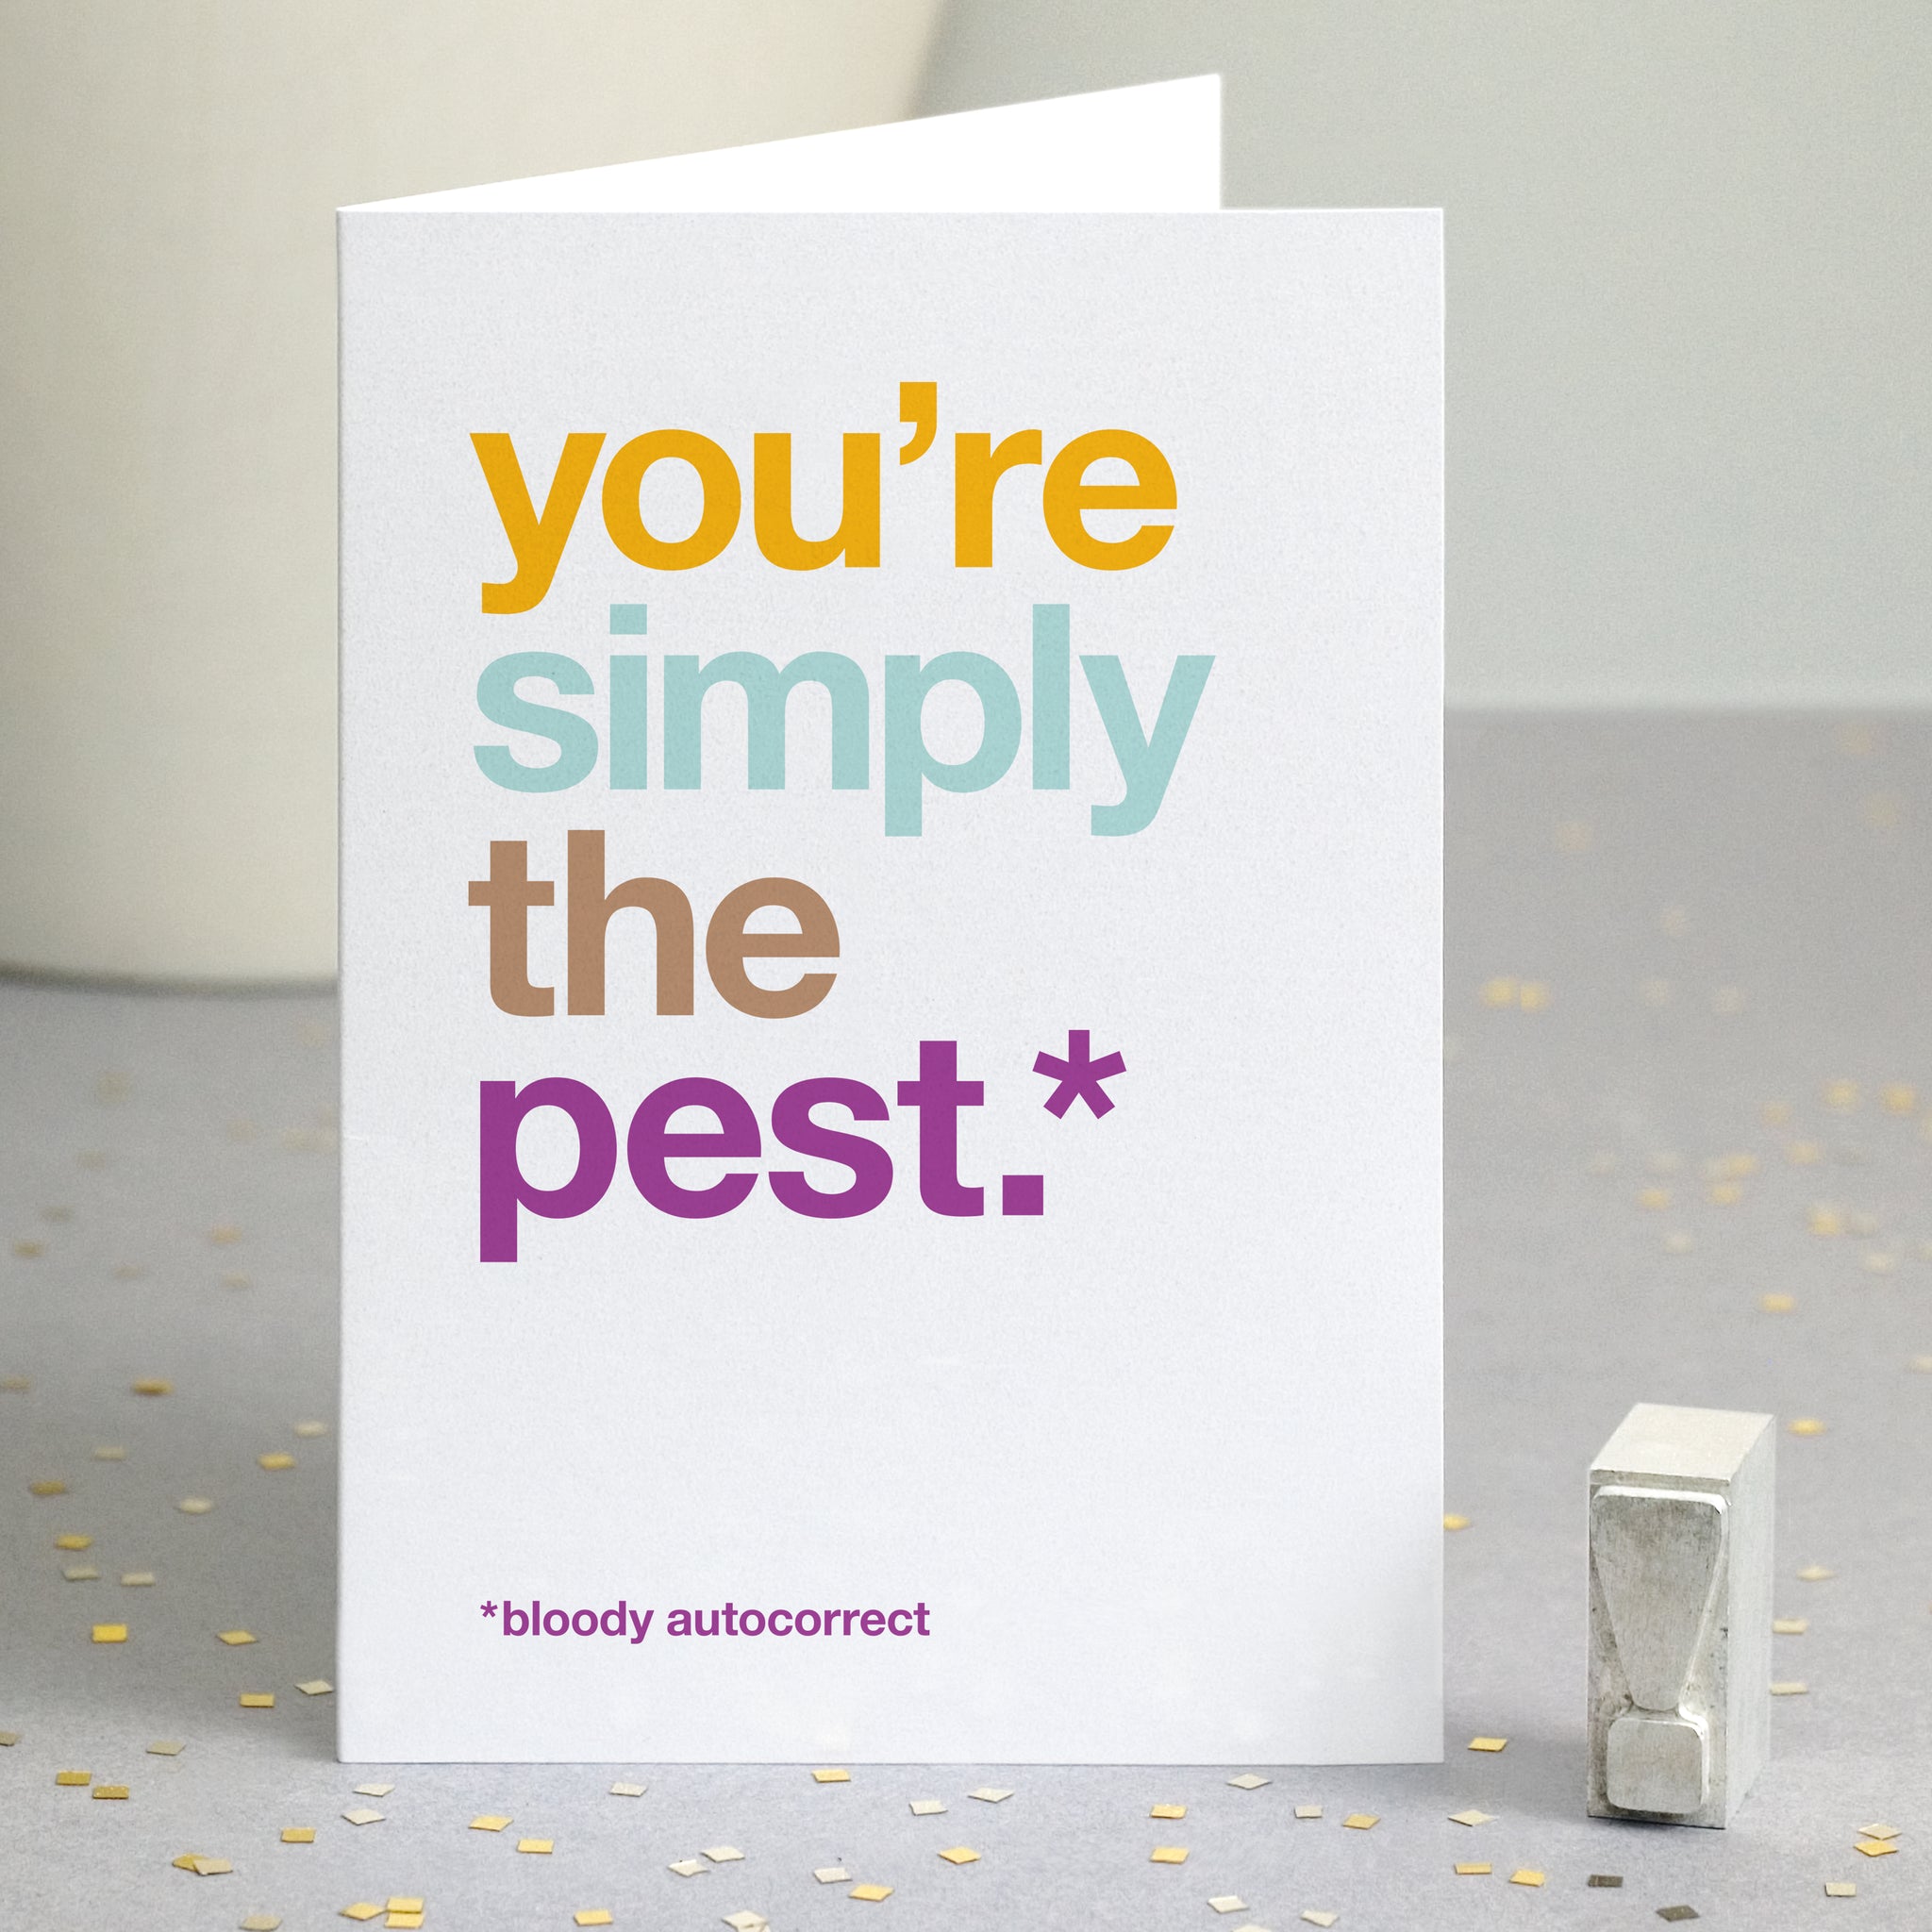 Funny thank you card autocorrected to 'you're simply the pest'.